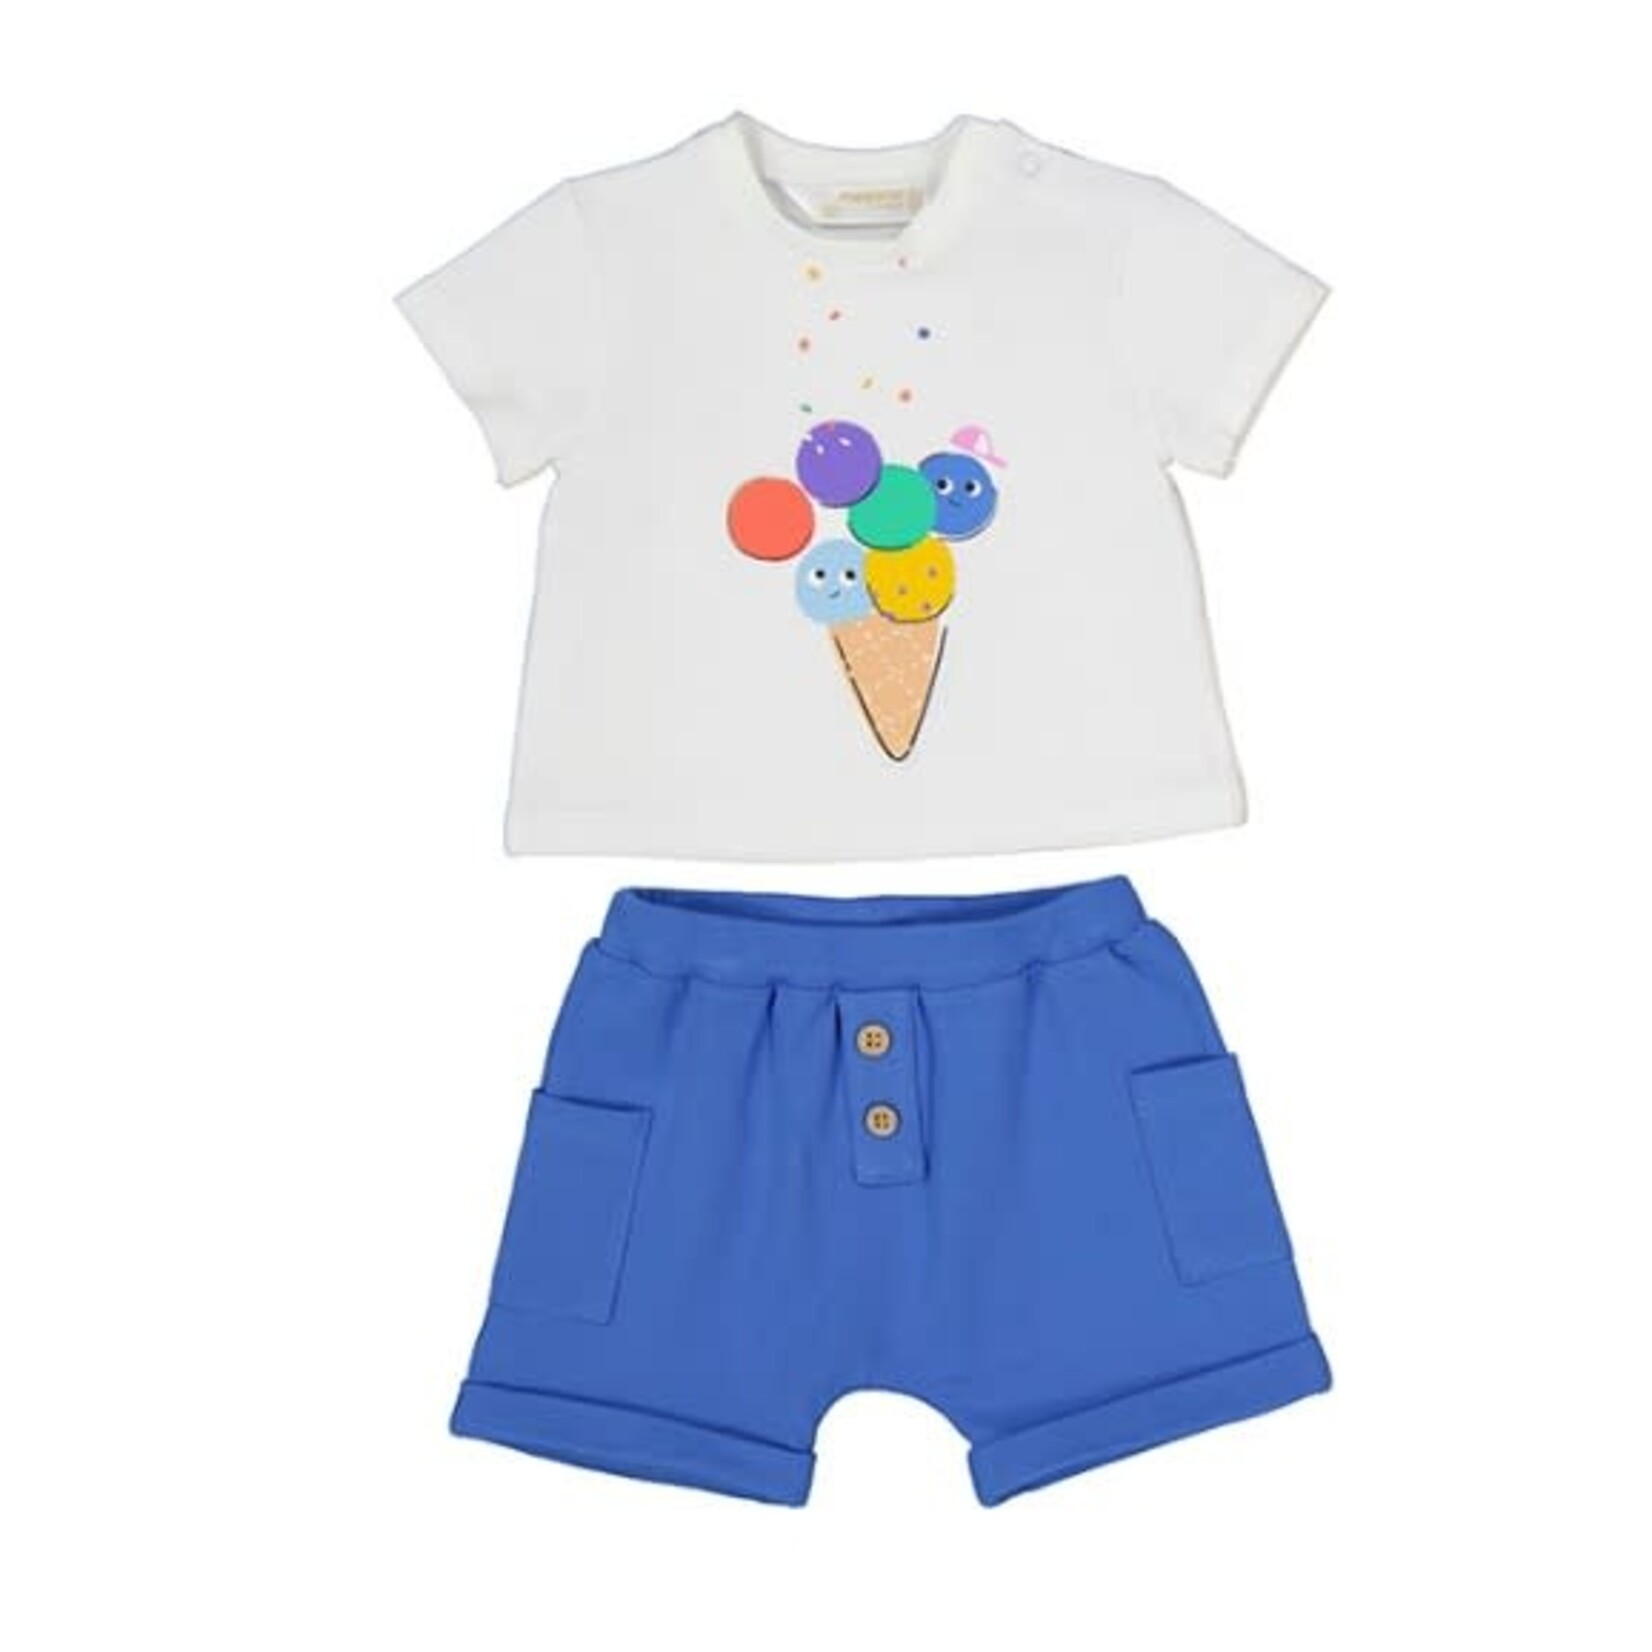 Mayoral MAYORAL - Two-piece set - White shortsleeve t-shirt with ice cream print and blue shorts